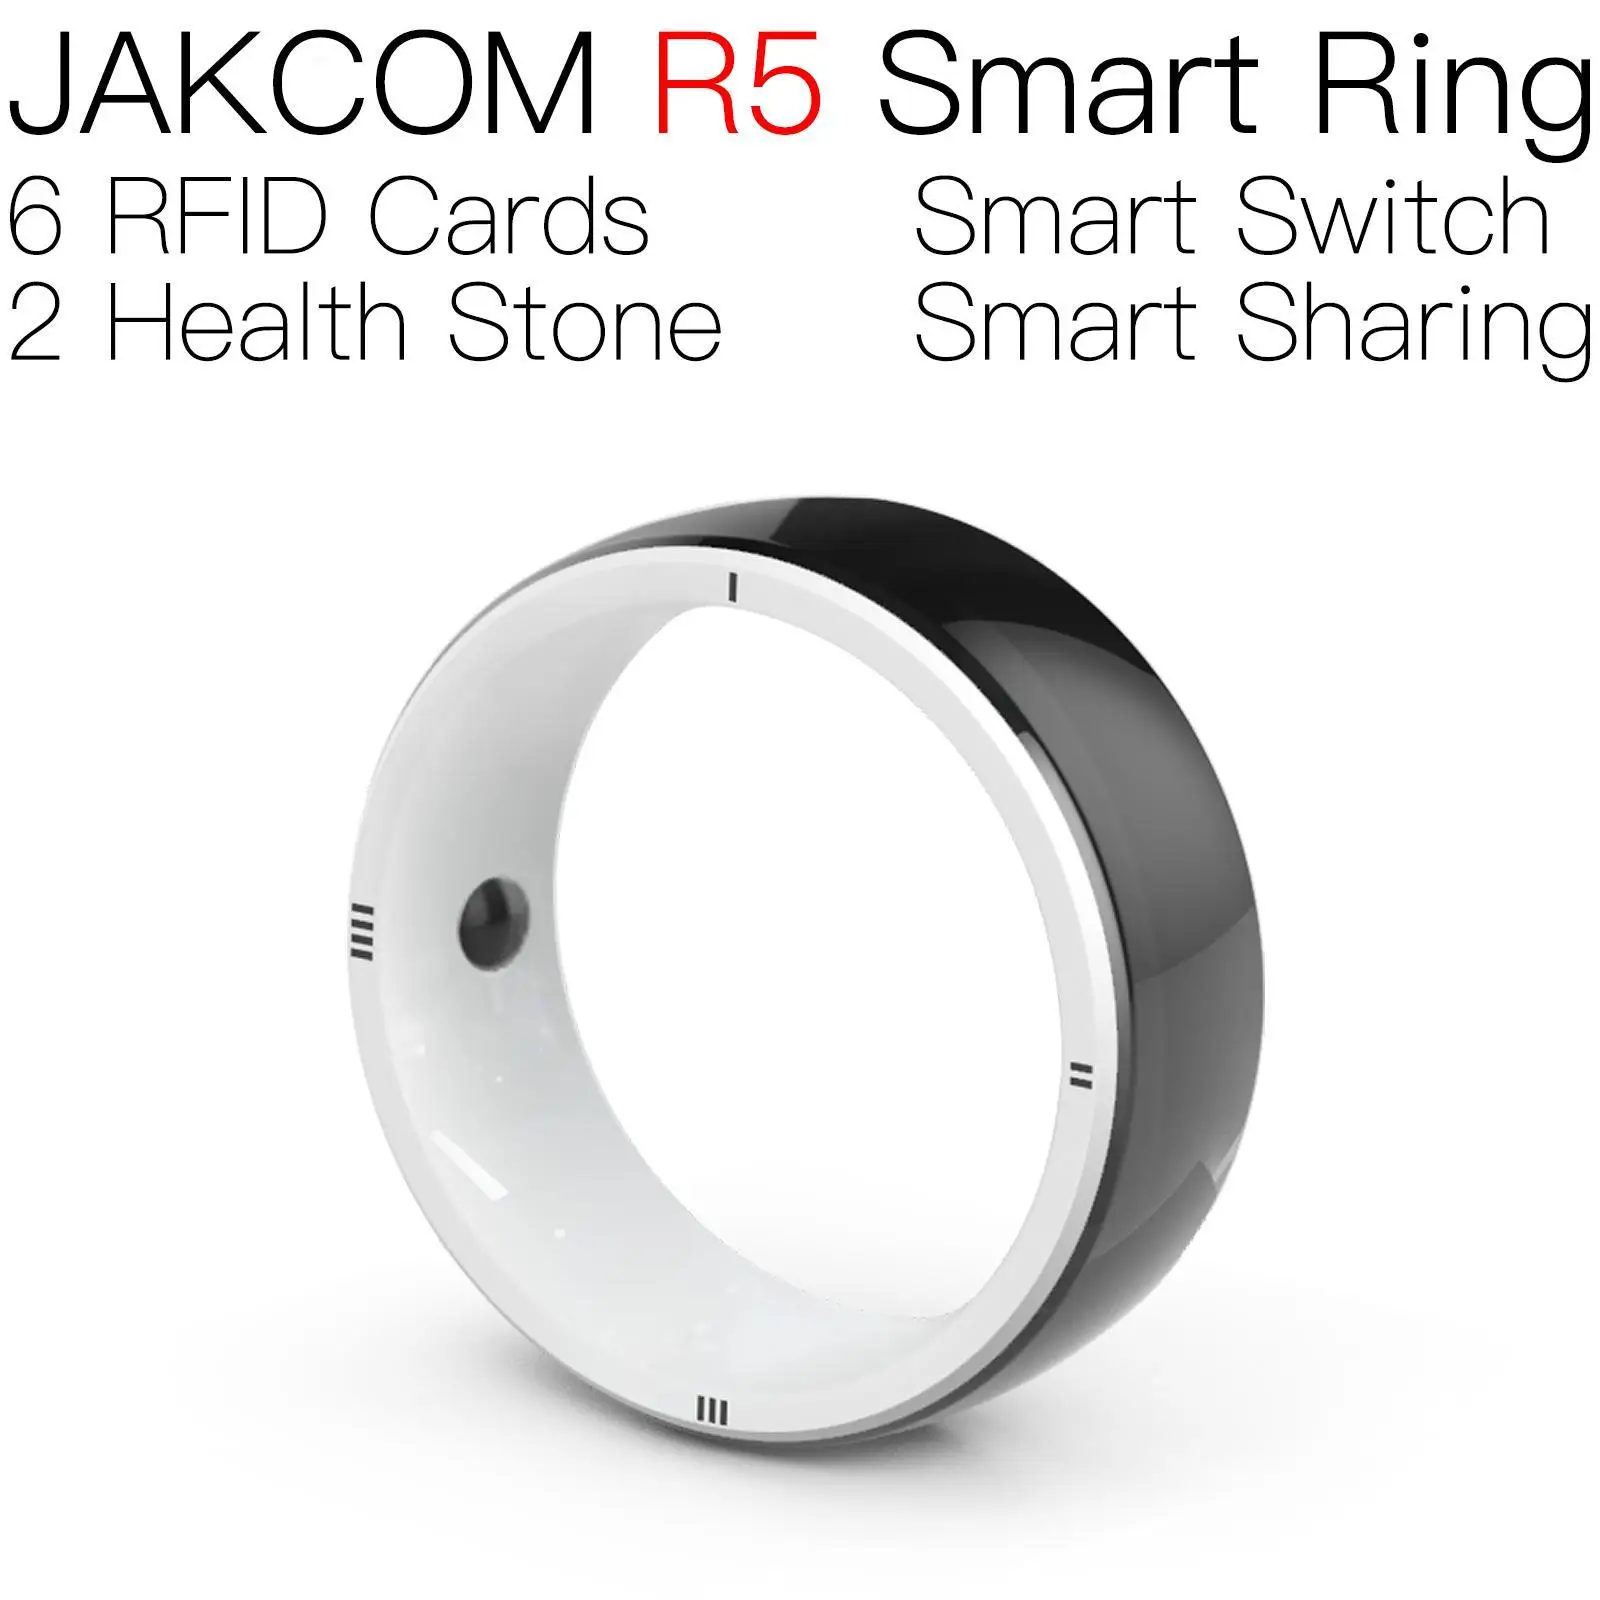 

JAKCOM R5 Smart Ring better than rfid key tags lazer tag game 100 cartes switch amibo cards sires 5 iso15693